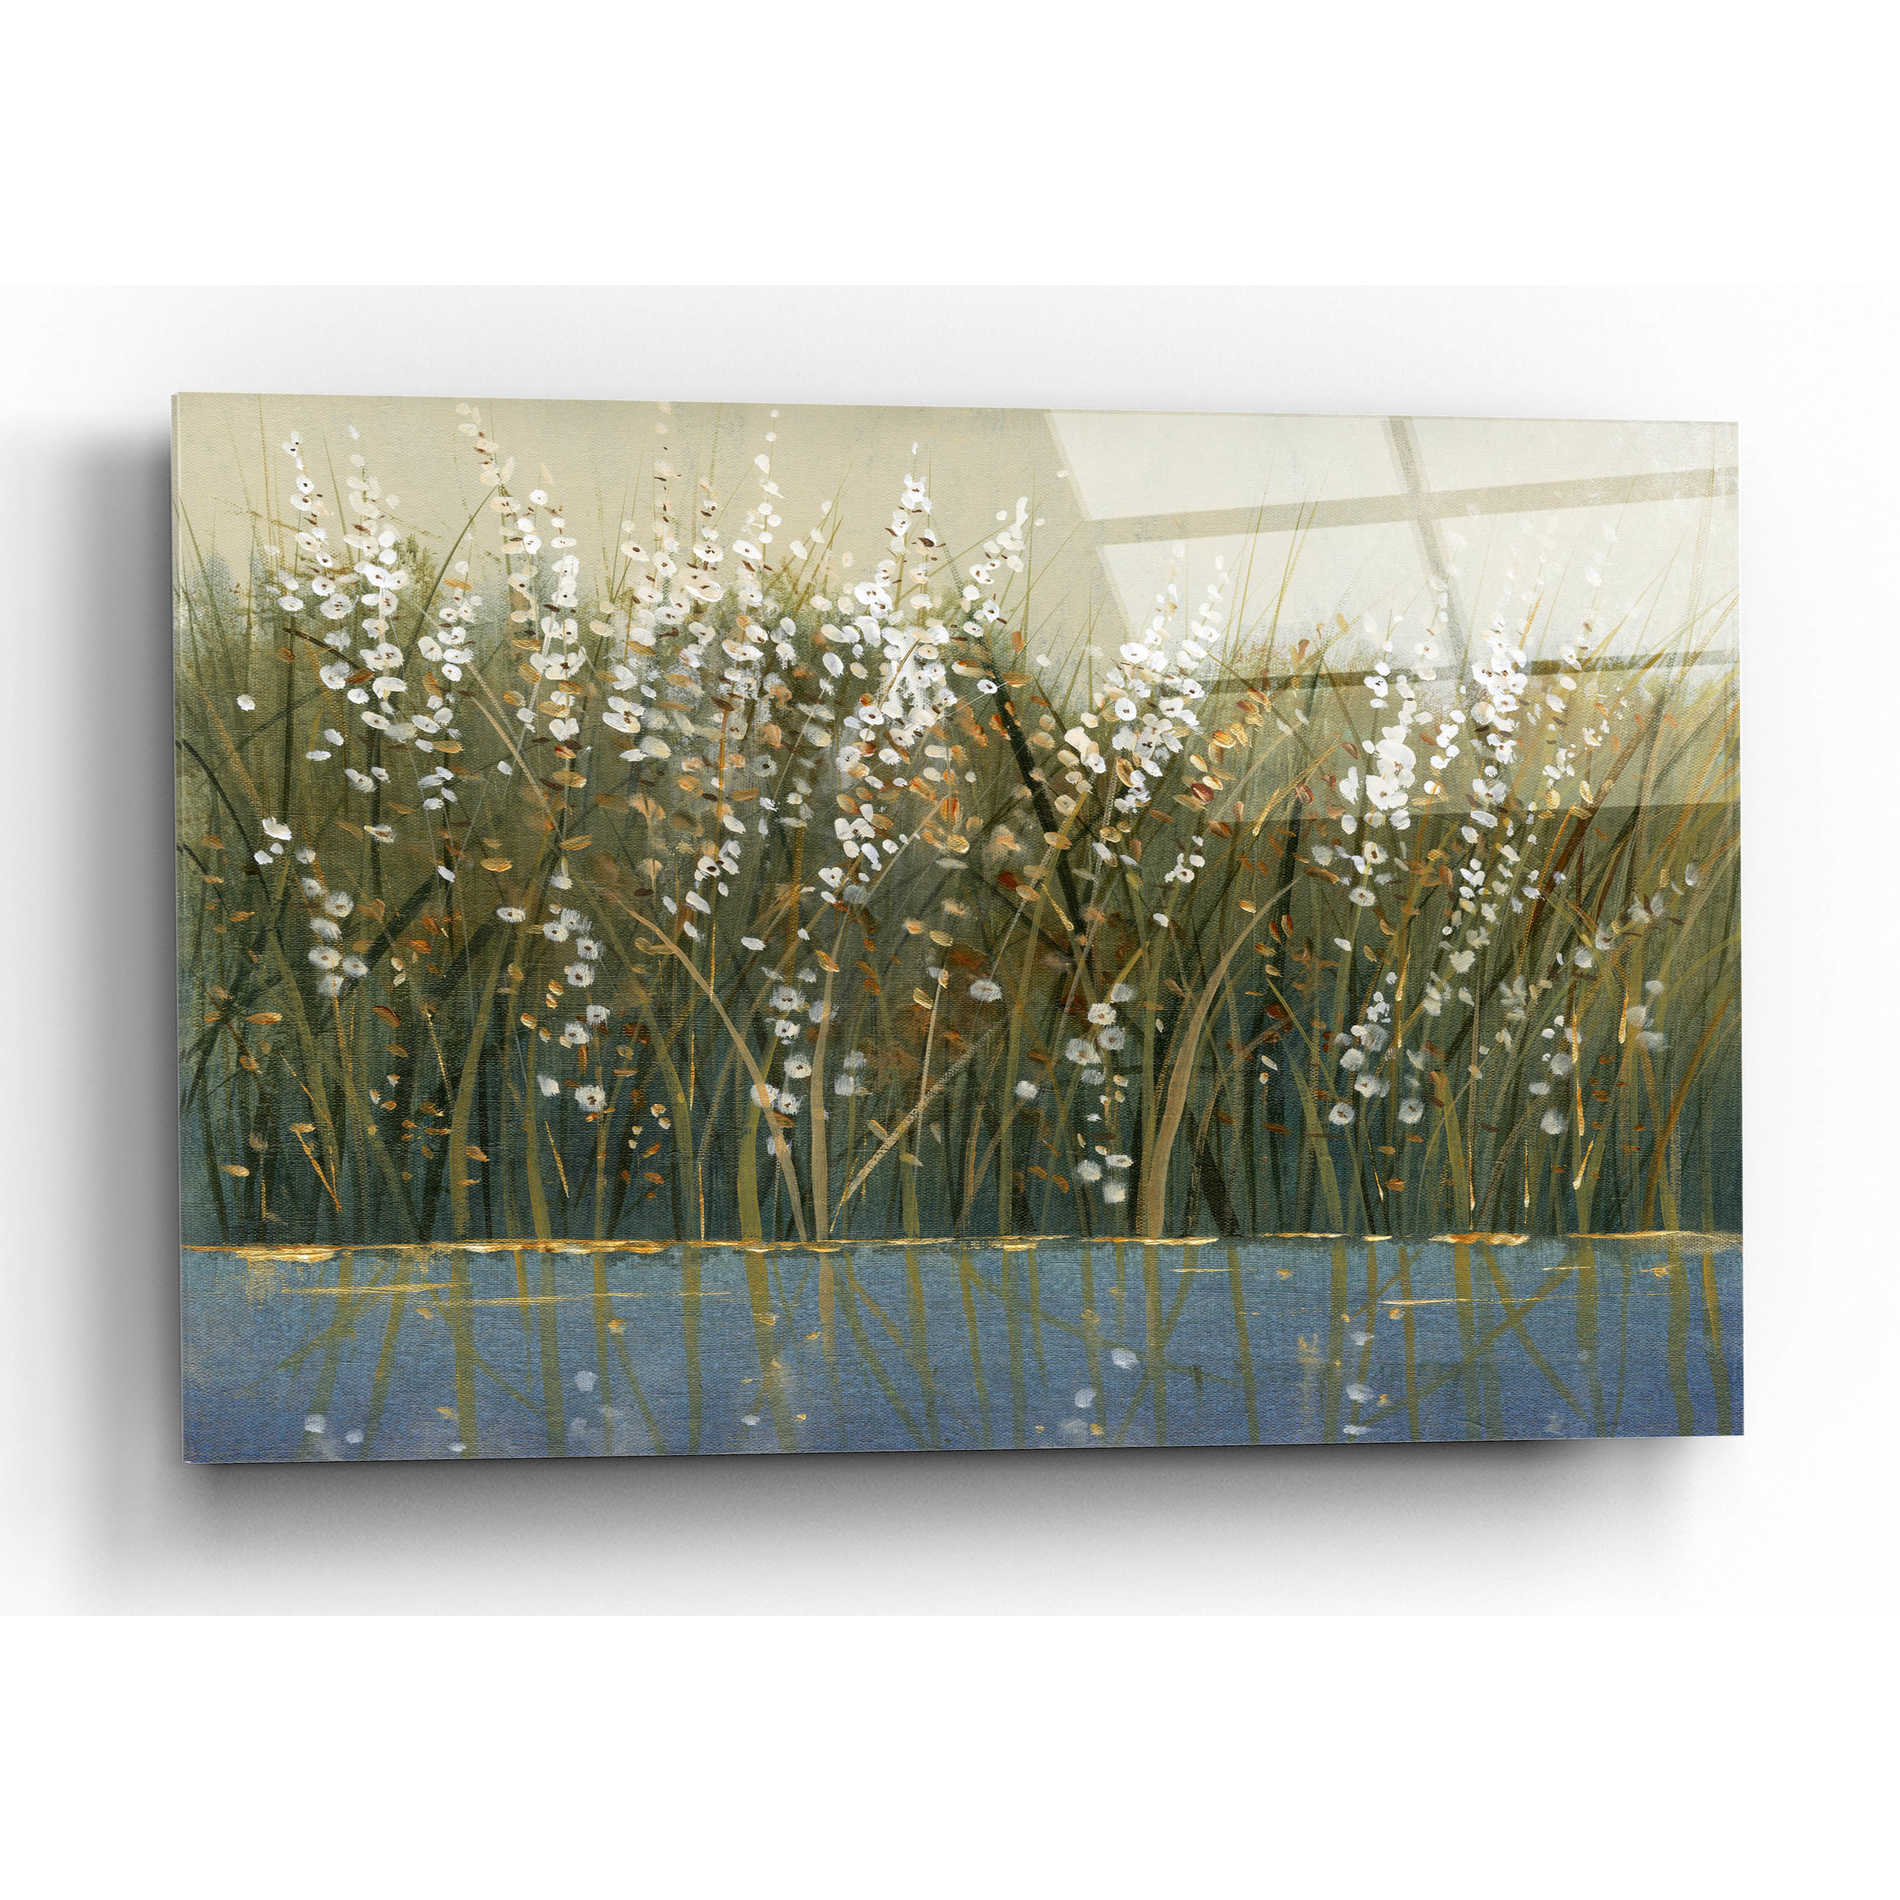 Epic Art 'By the Tall Grass I' by Tim O'Toole, Acrylic Glass Wall Art